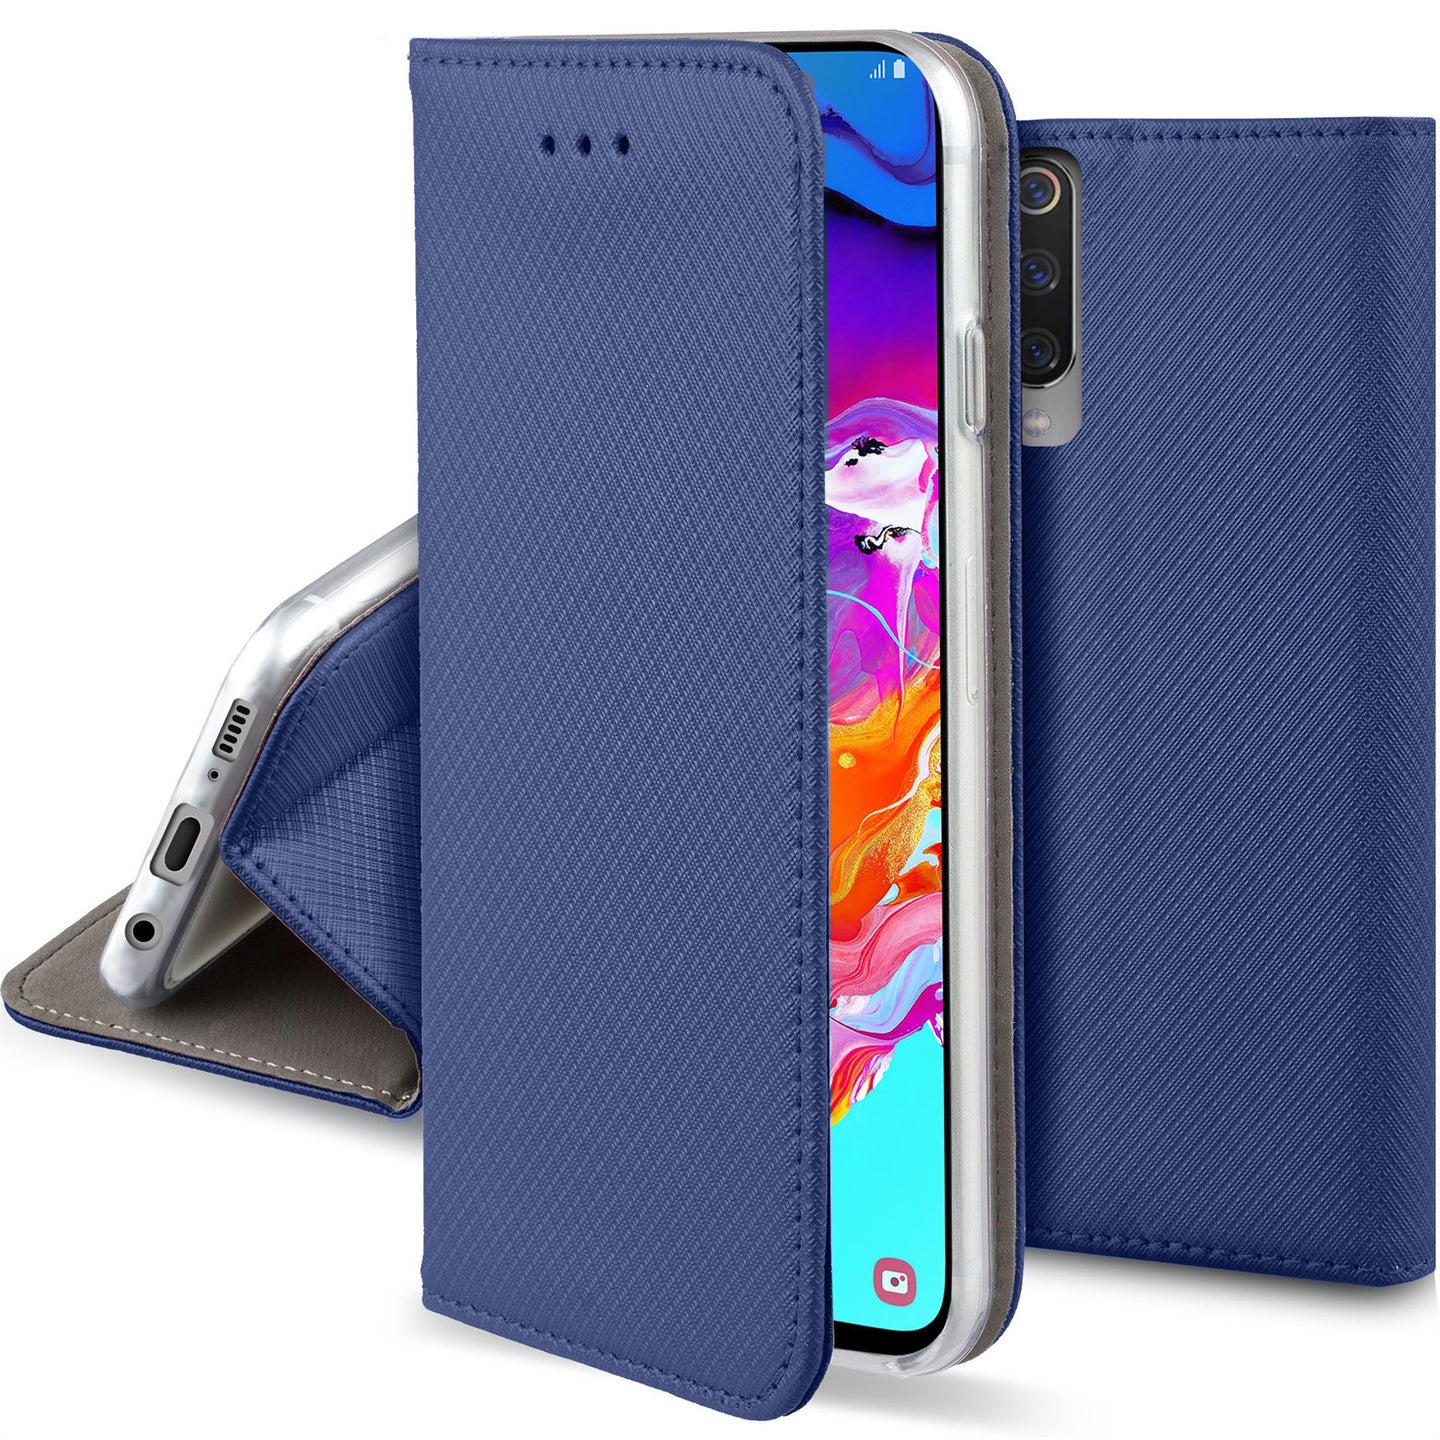 Moozy Case Flip Cover for Samsung A70, Dark Blue - Smart Magnetic Flip Case with Card Holder and Stand